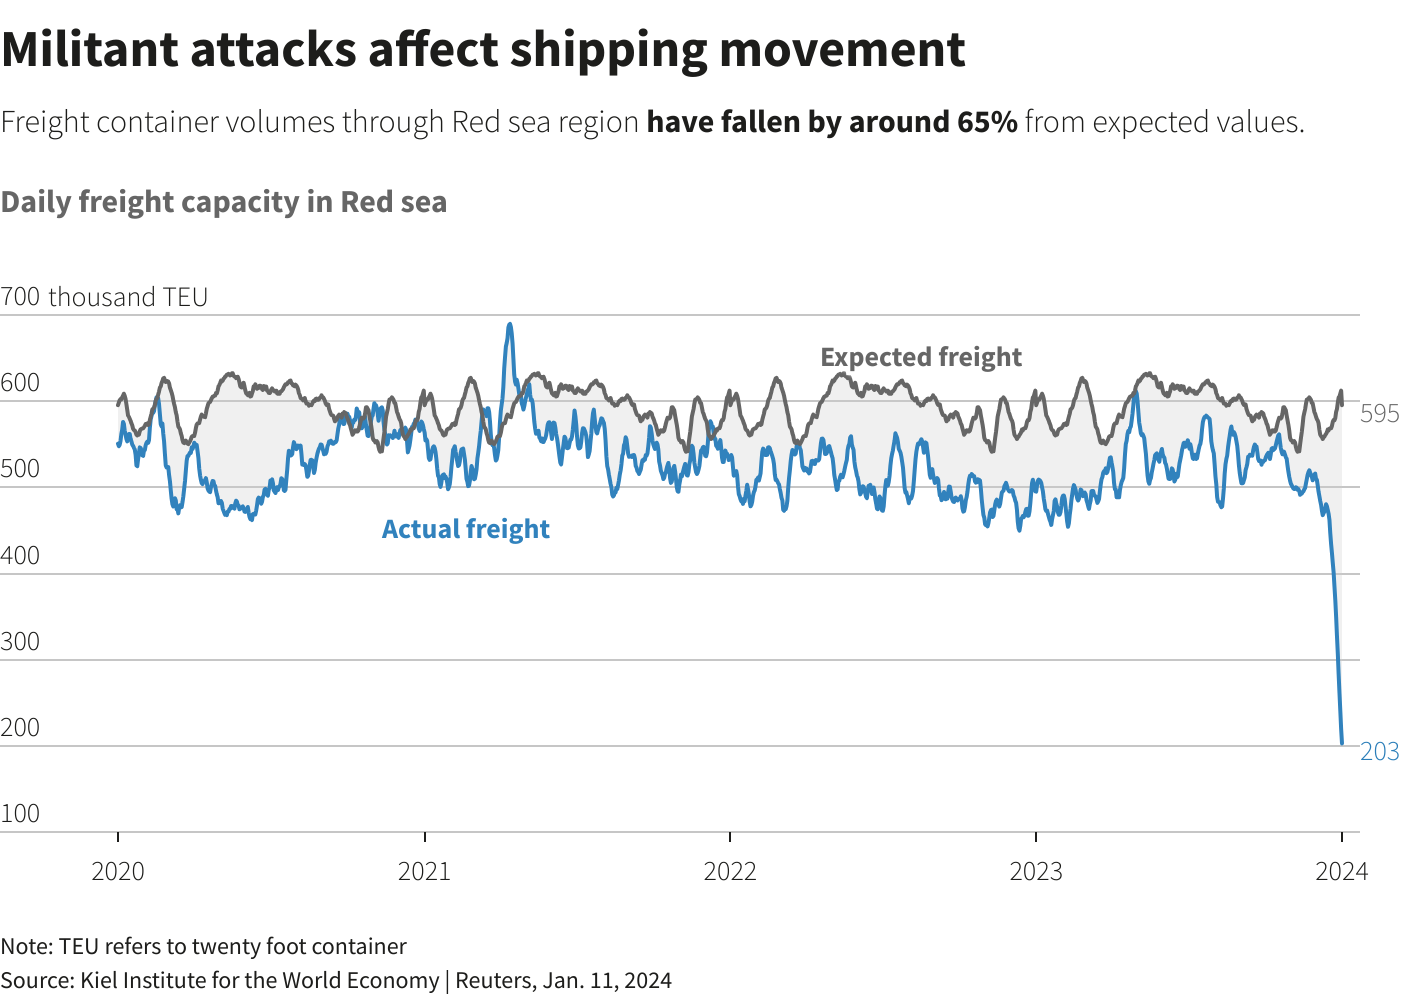 Militant attacks affect shipping movement in the Red Sea